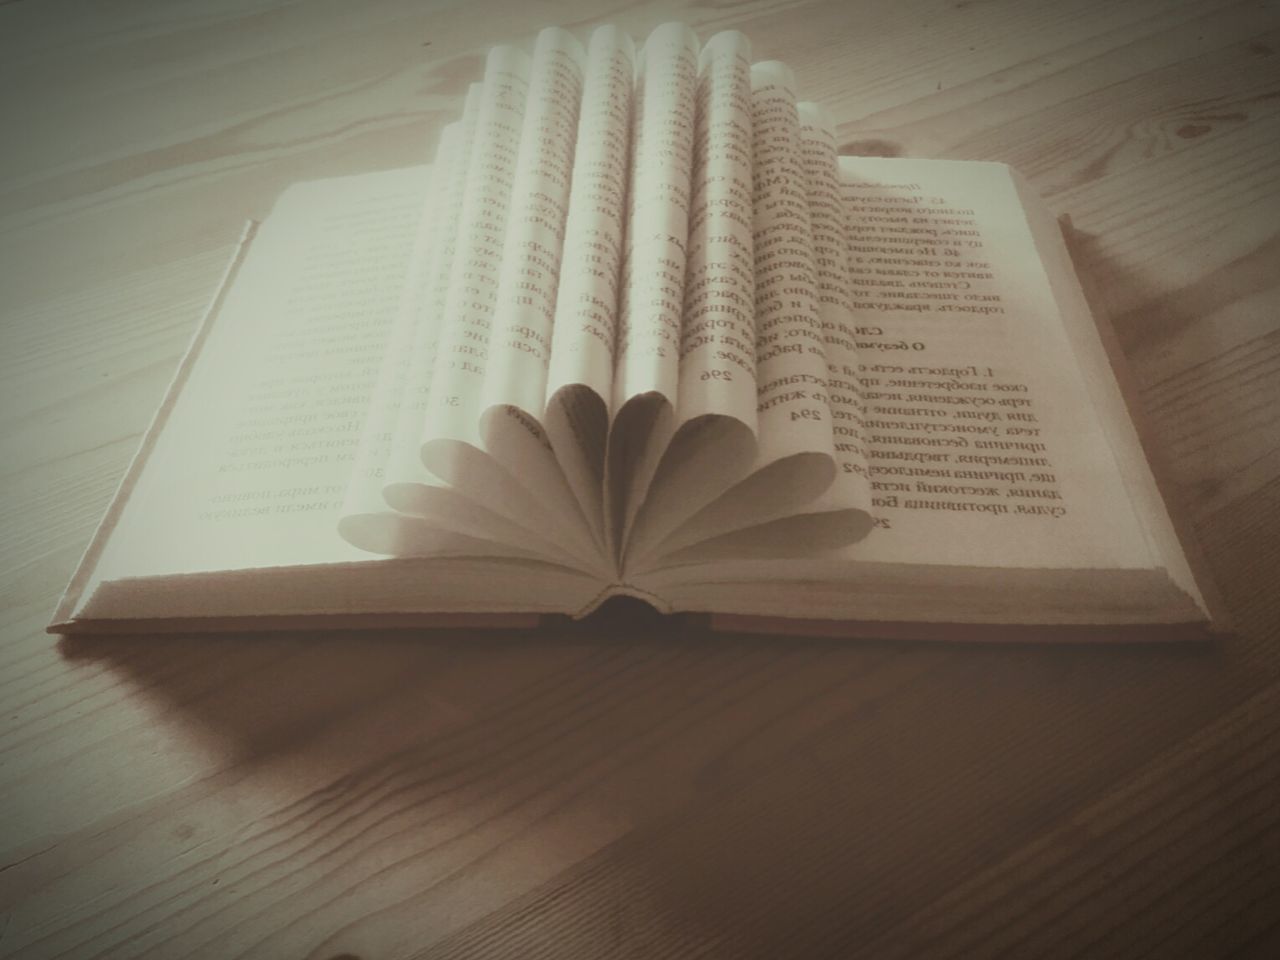 CLOSE-UP OF OPEN BOOK ON TABLE